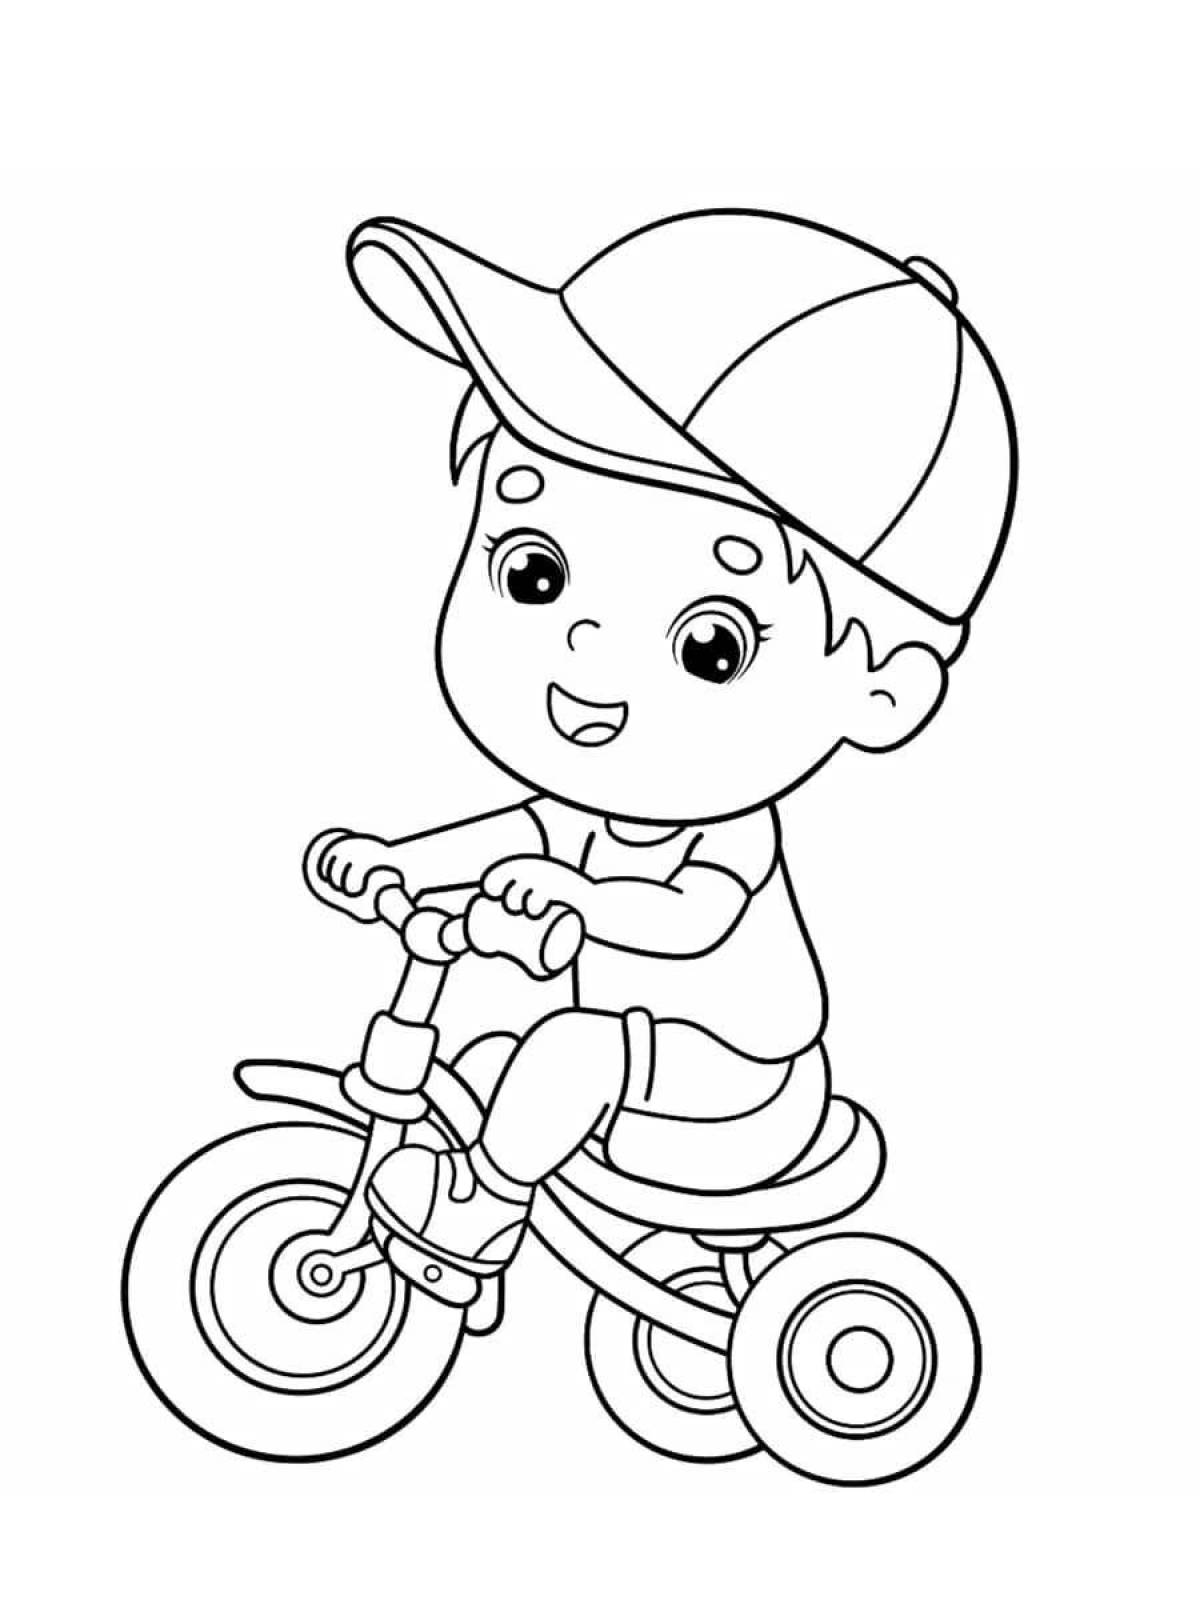 Fun coloring book for boys 4-5 years old